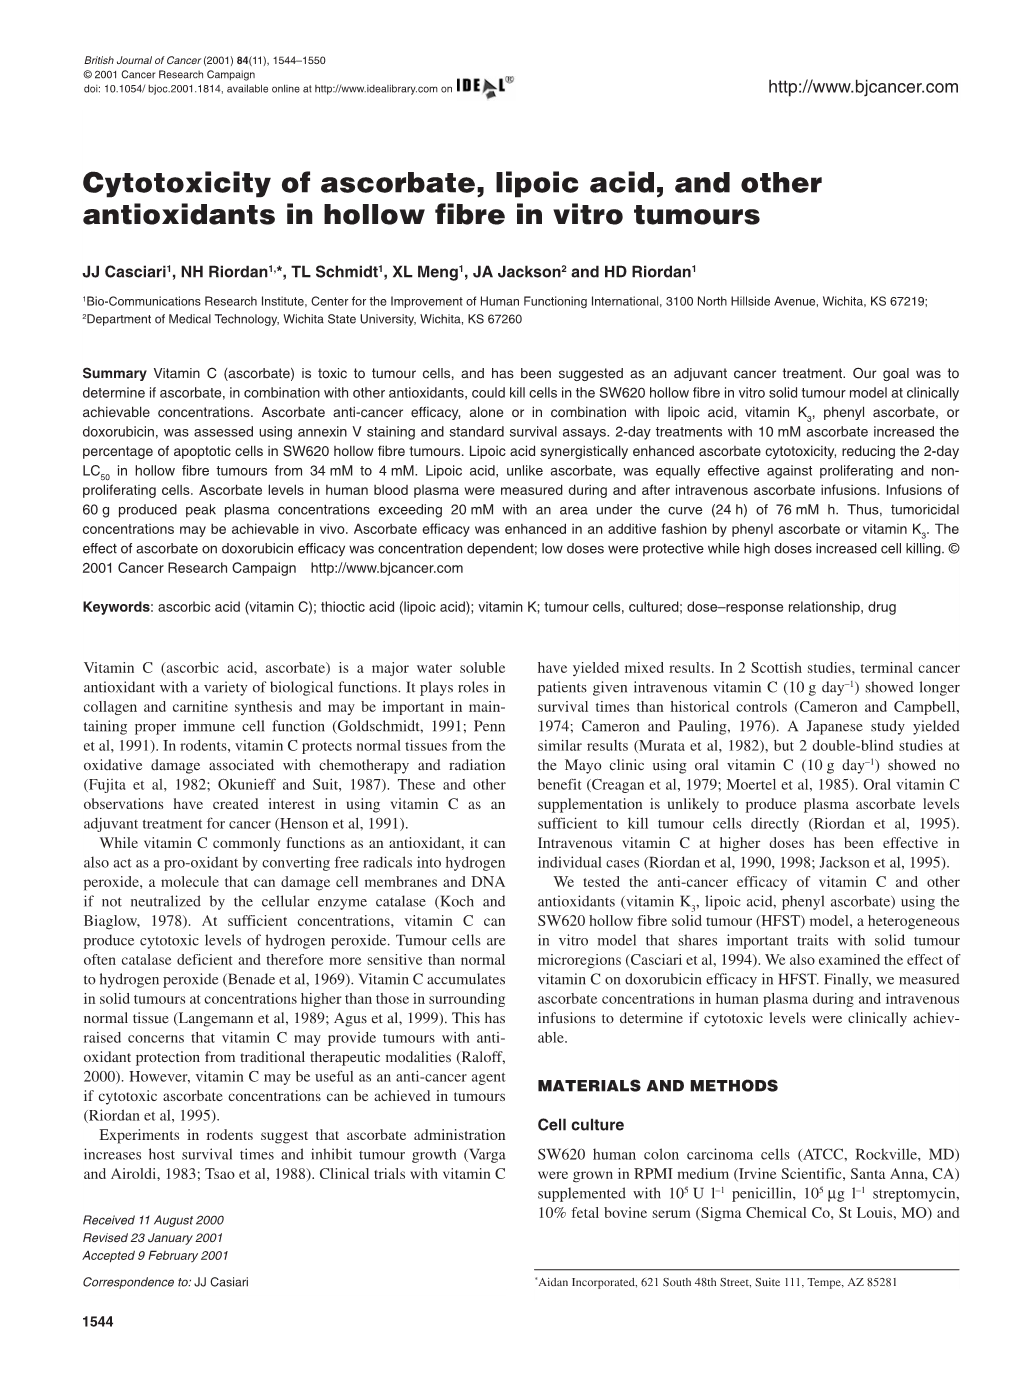 Cytotoxicity of Ascorbate, Lipoic Acid, and Other Antioxidants in Hollow Fibre in Vitro Tumours